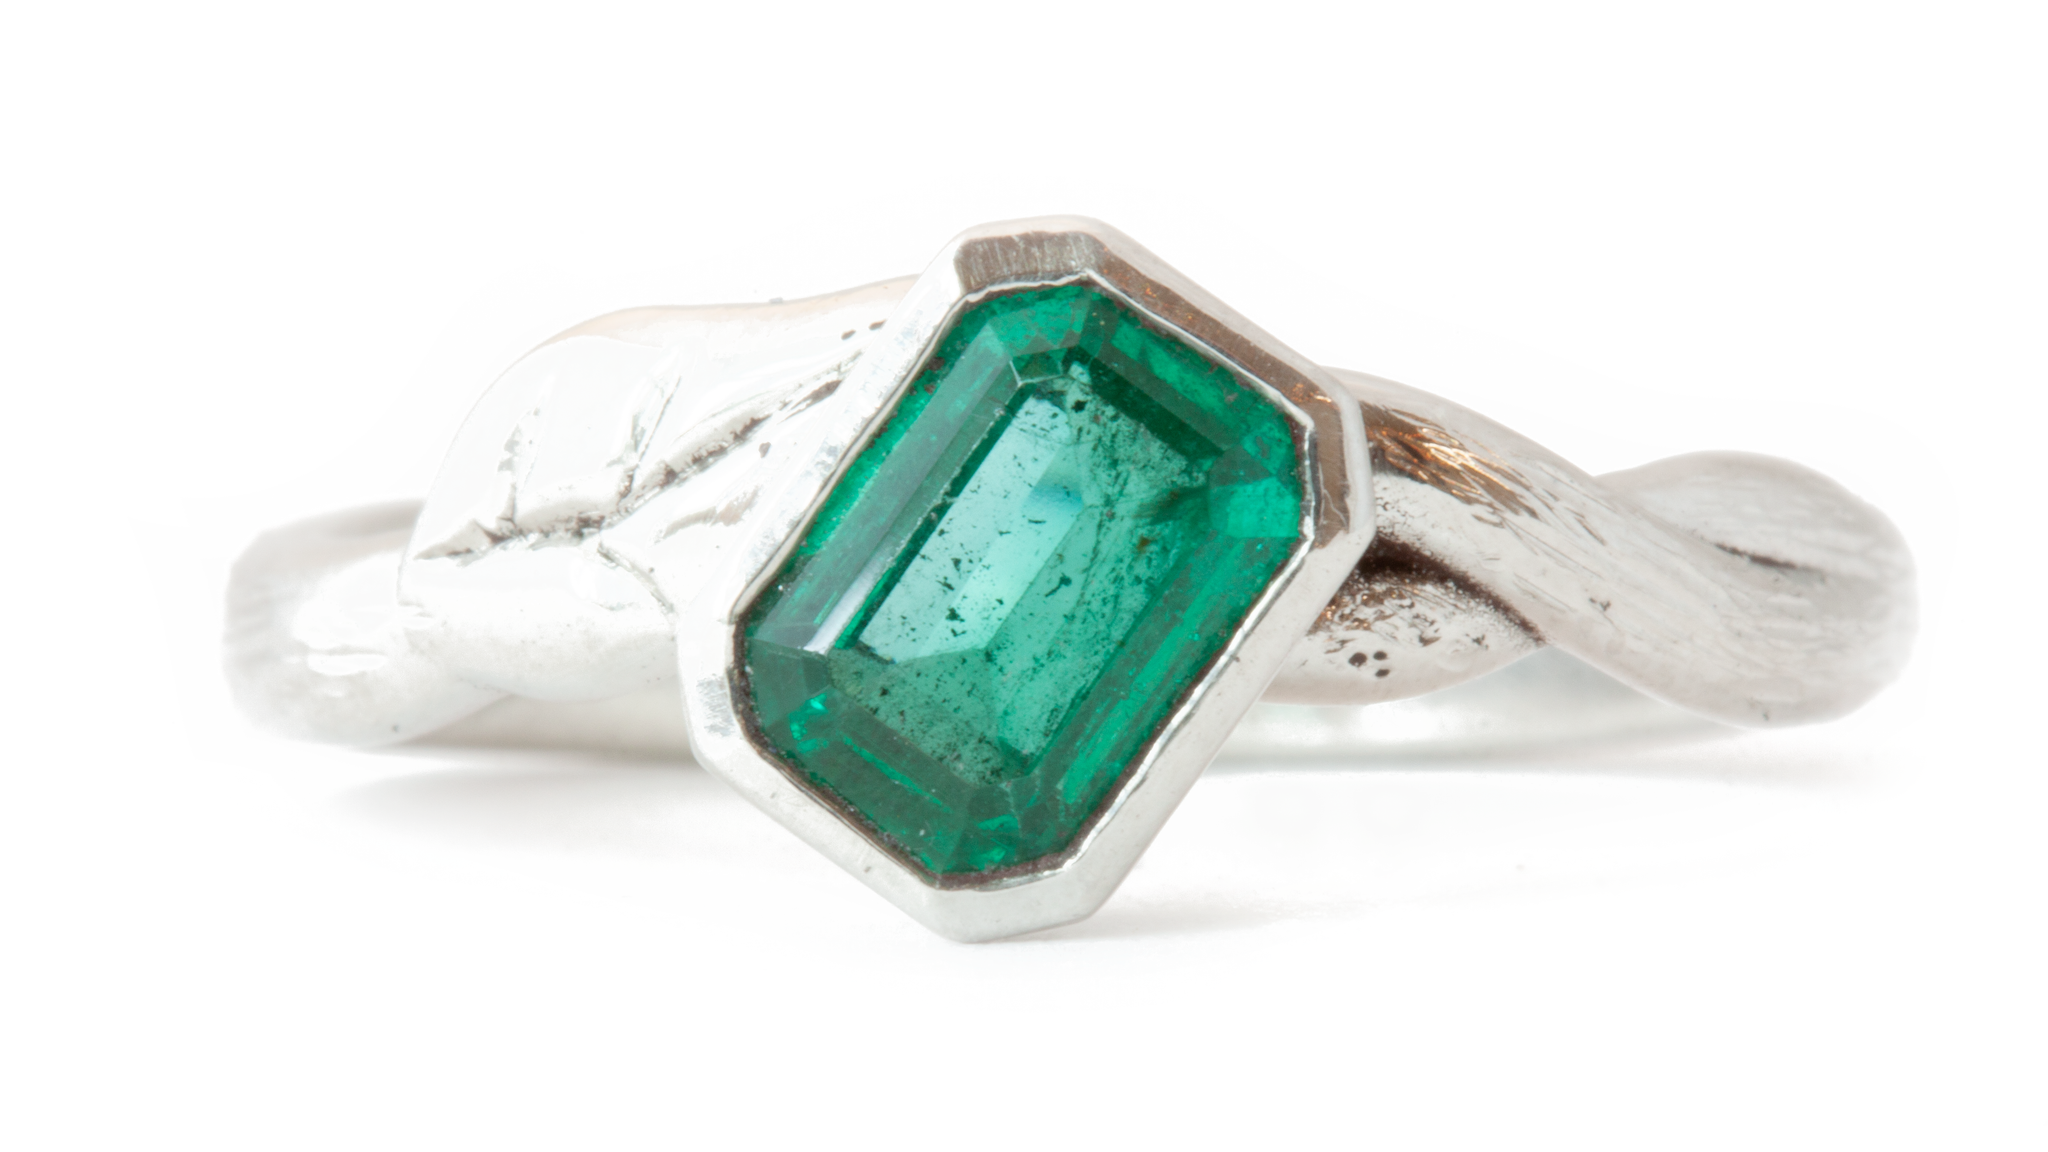 Heirloom emerald in bezel setting on platinum band with birch texture and leaf design